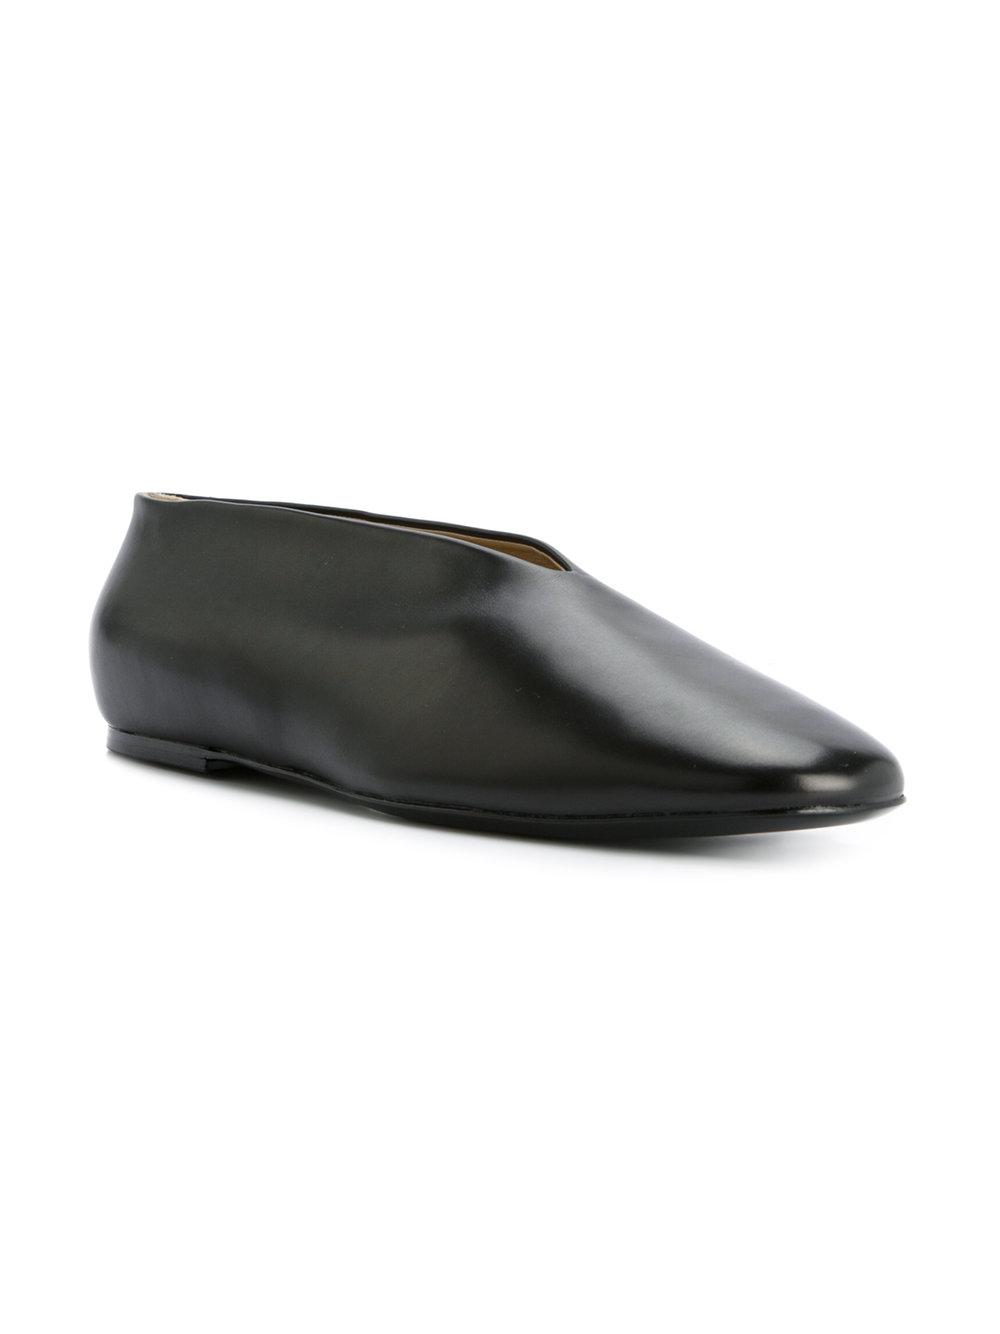 Lemaire Leather Ballerina Shoes in Black - Lyst